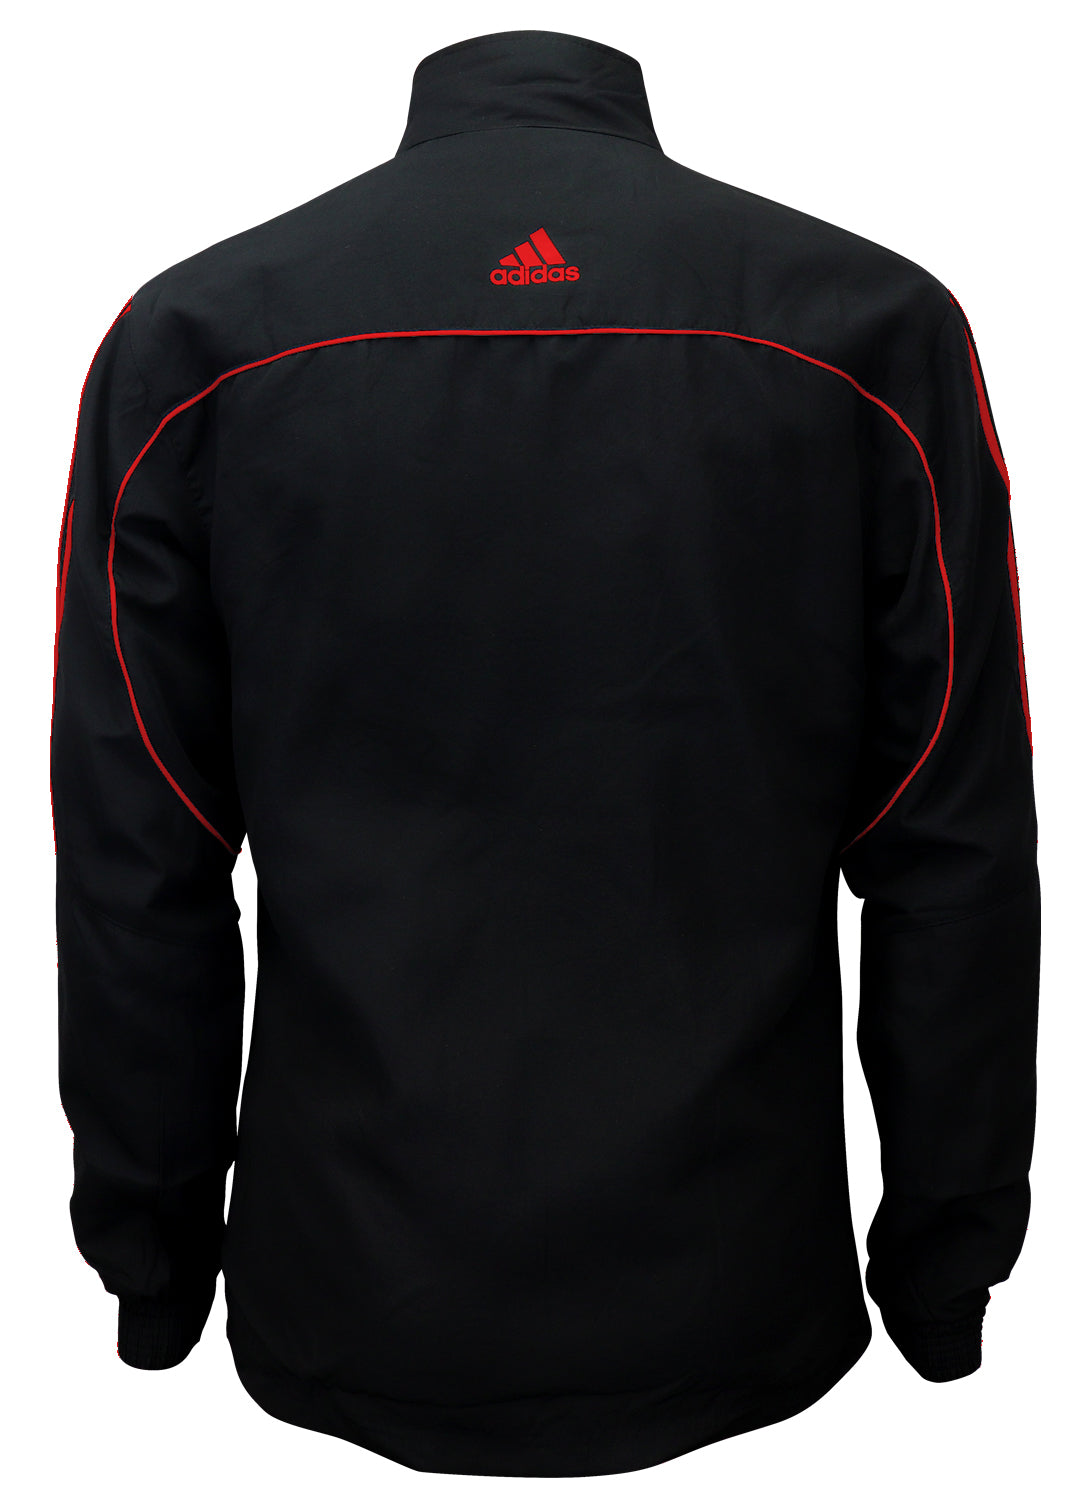 adidas Black with Red Stripes Windbreaker Style Team Jacket Back View